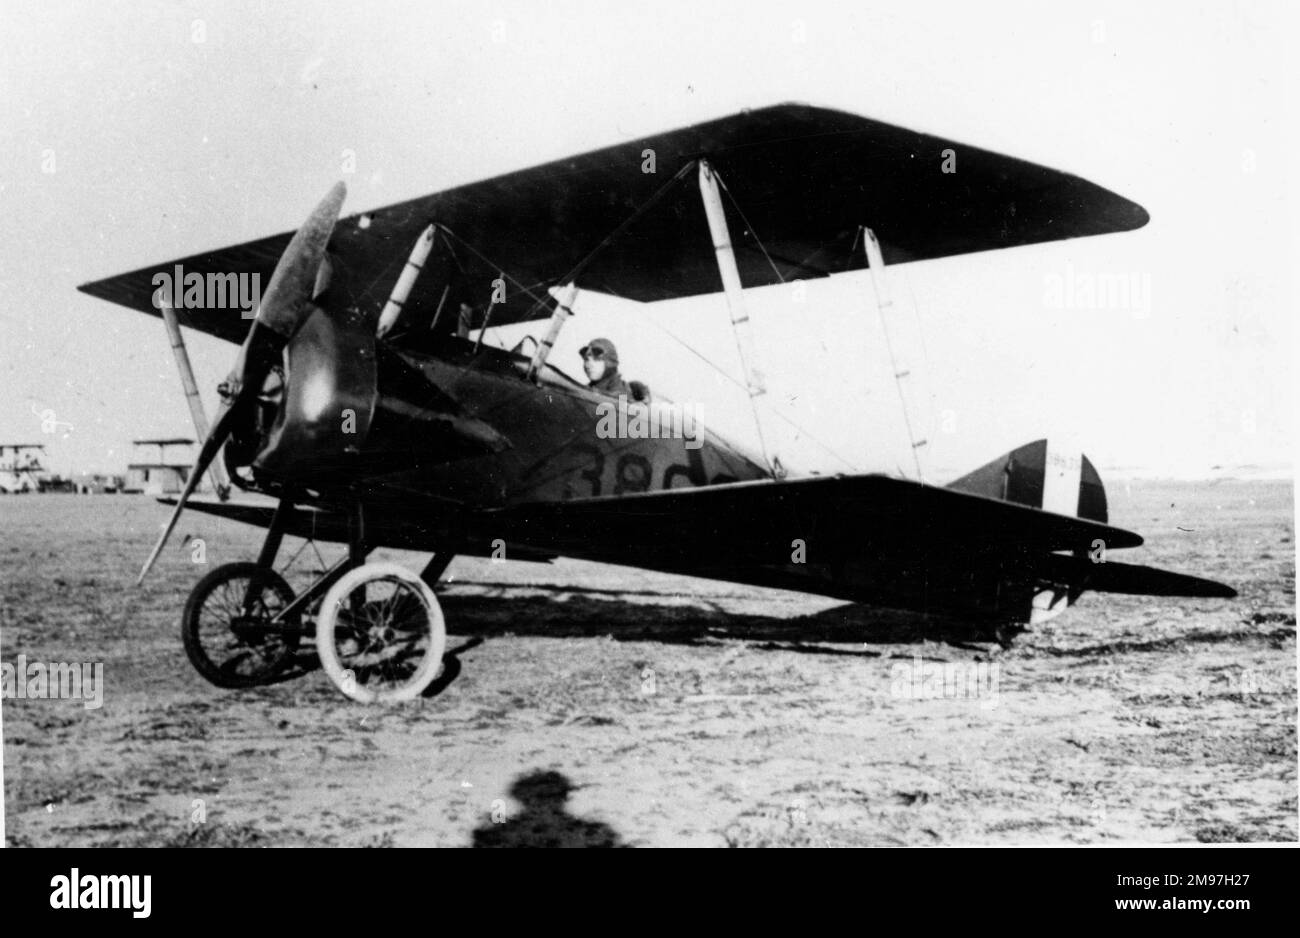 Thomas Morse S-4C single-seat fighter (American).  The S-4 design began in autumn 1916, the first flight was made in spring 1917, evaluation in June 1917, and deliveries began in November 1917.  The S-4C was the dominant version.  Seen here is a US Army S-4C, serial no. 38635, at San Diego's Rockwell Field in late 1918. Stock Photo